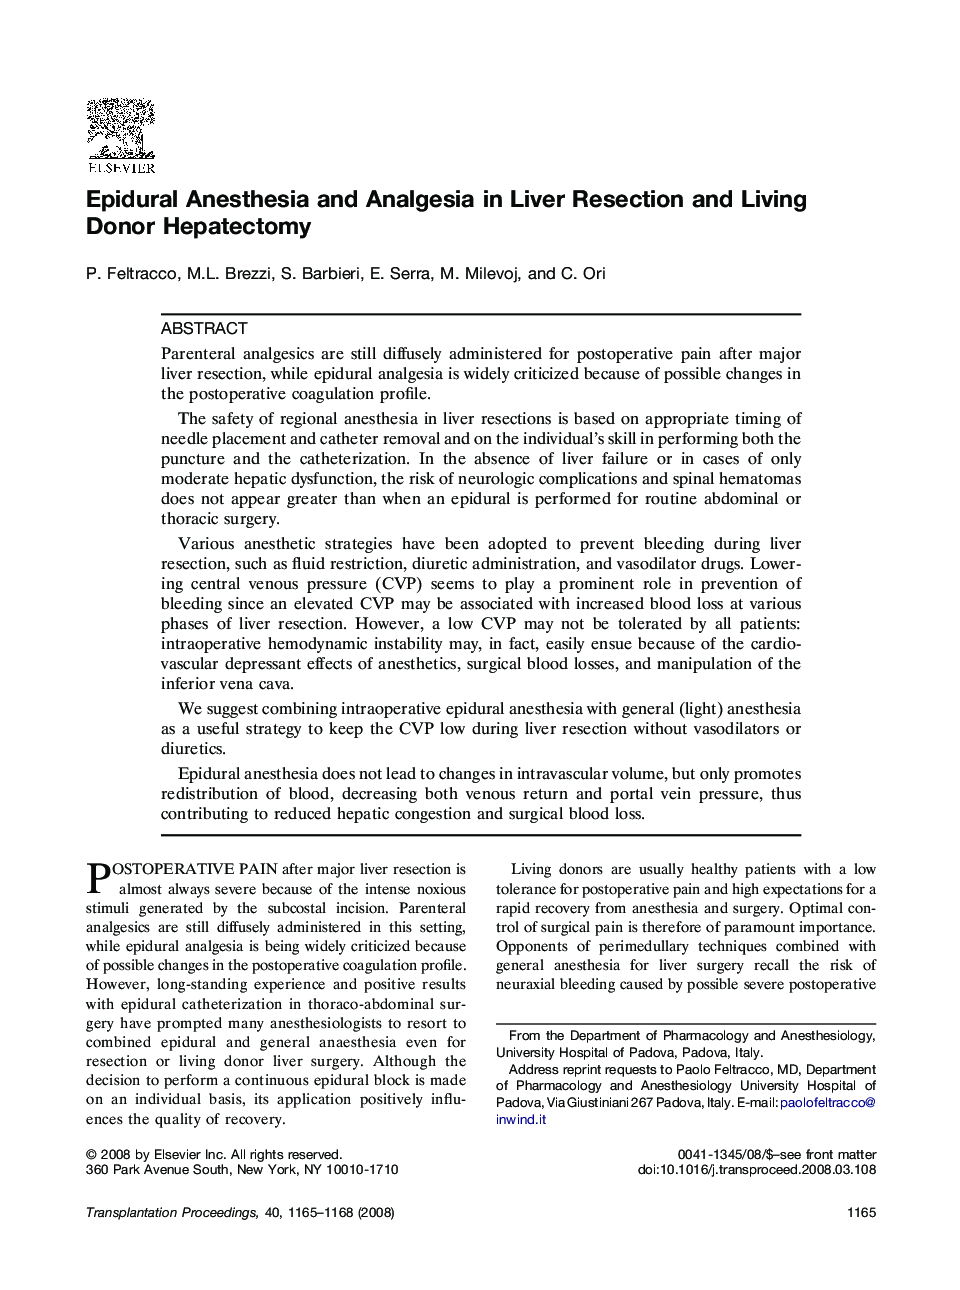 Epidural Anesthesia and Analgesia in Liver Resection and Living Donor Hepatectomy